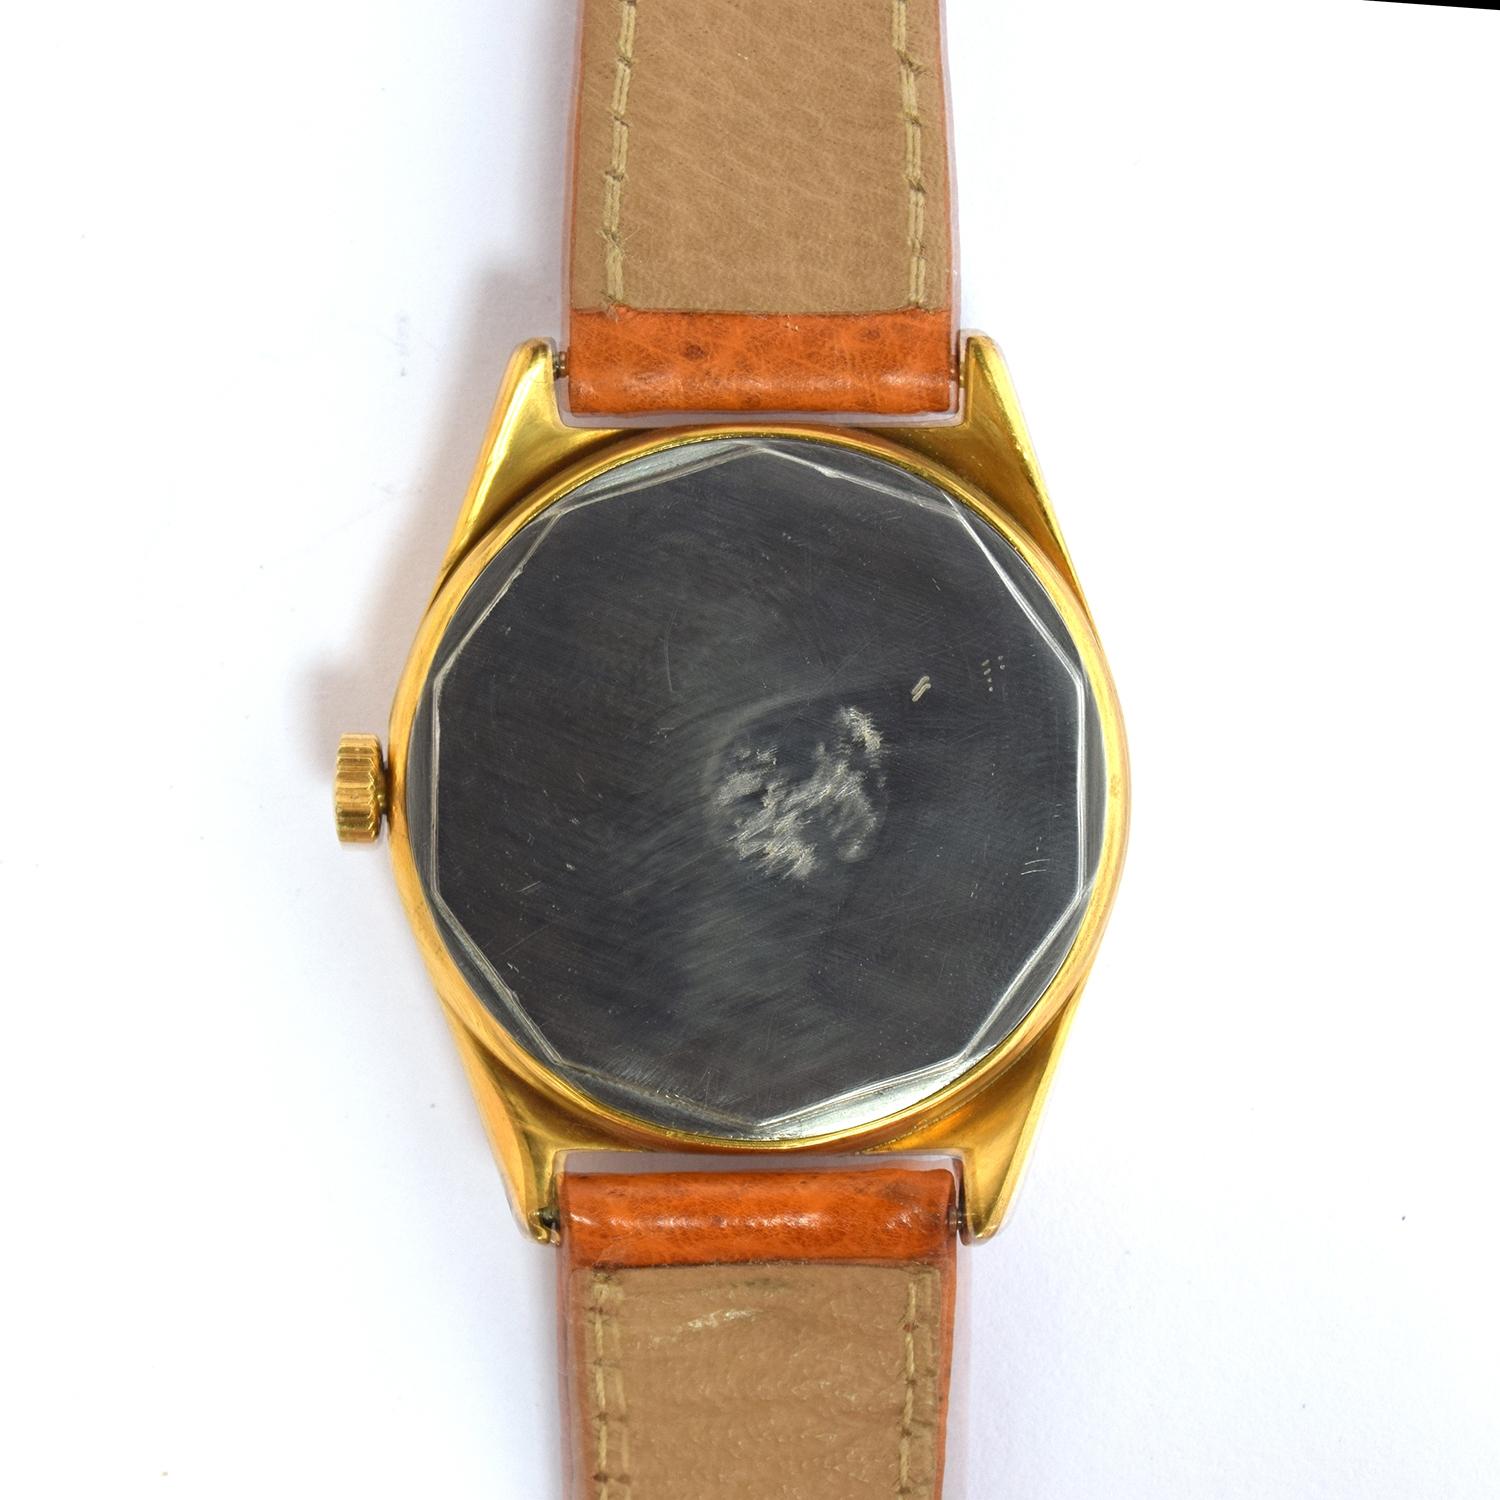 A TISSOT VISODATE SEASTAR PR516 GENTLEMAN'S STEEL AND GOLD PLATED WATCH Circa 1960s, silvered dial - Image 3 of 3